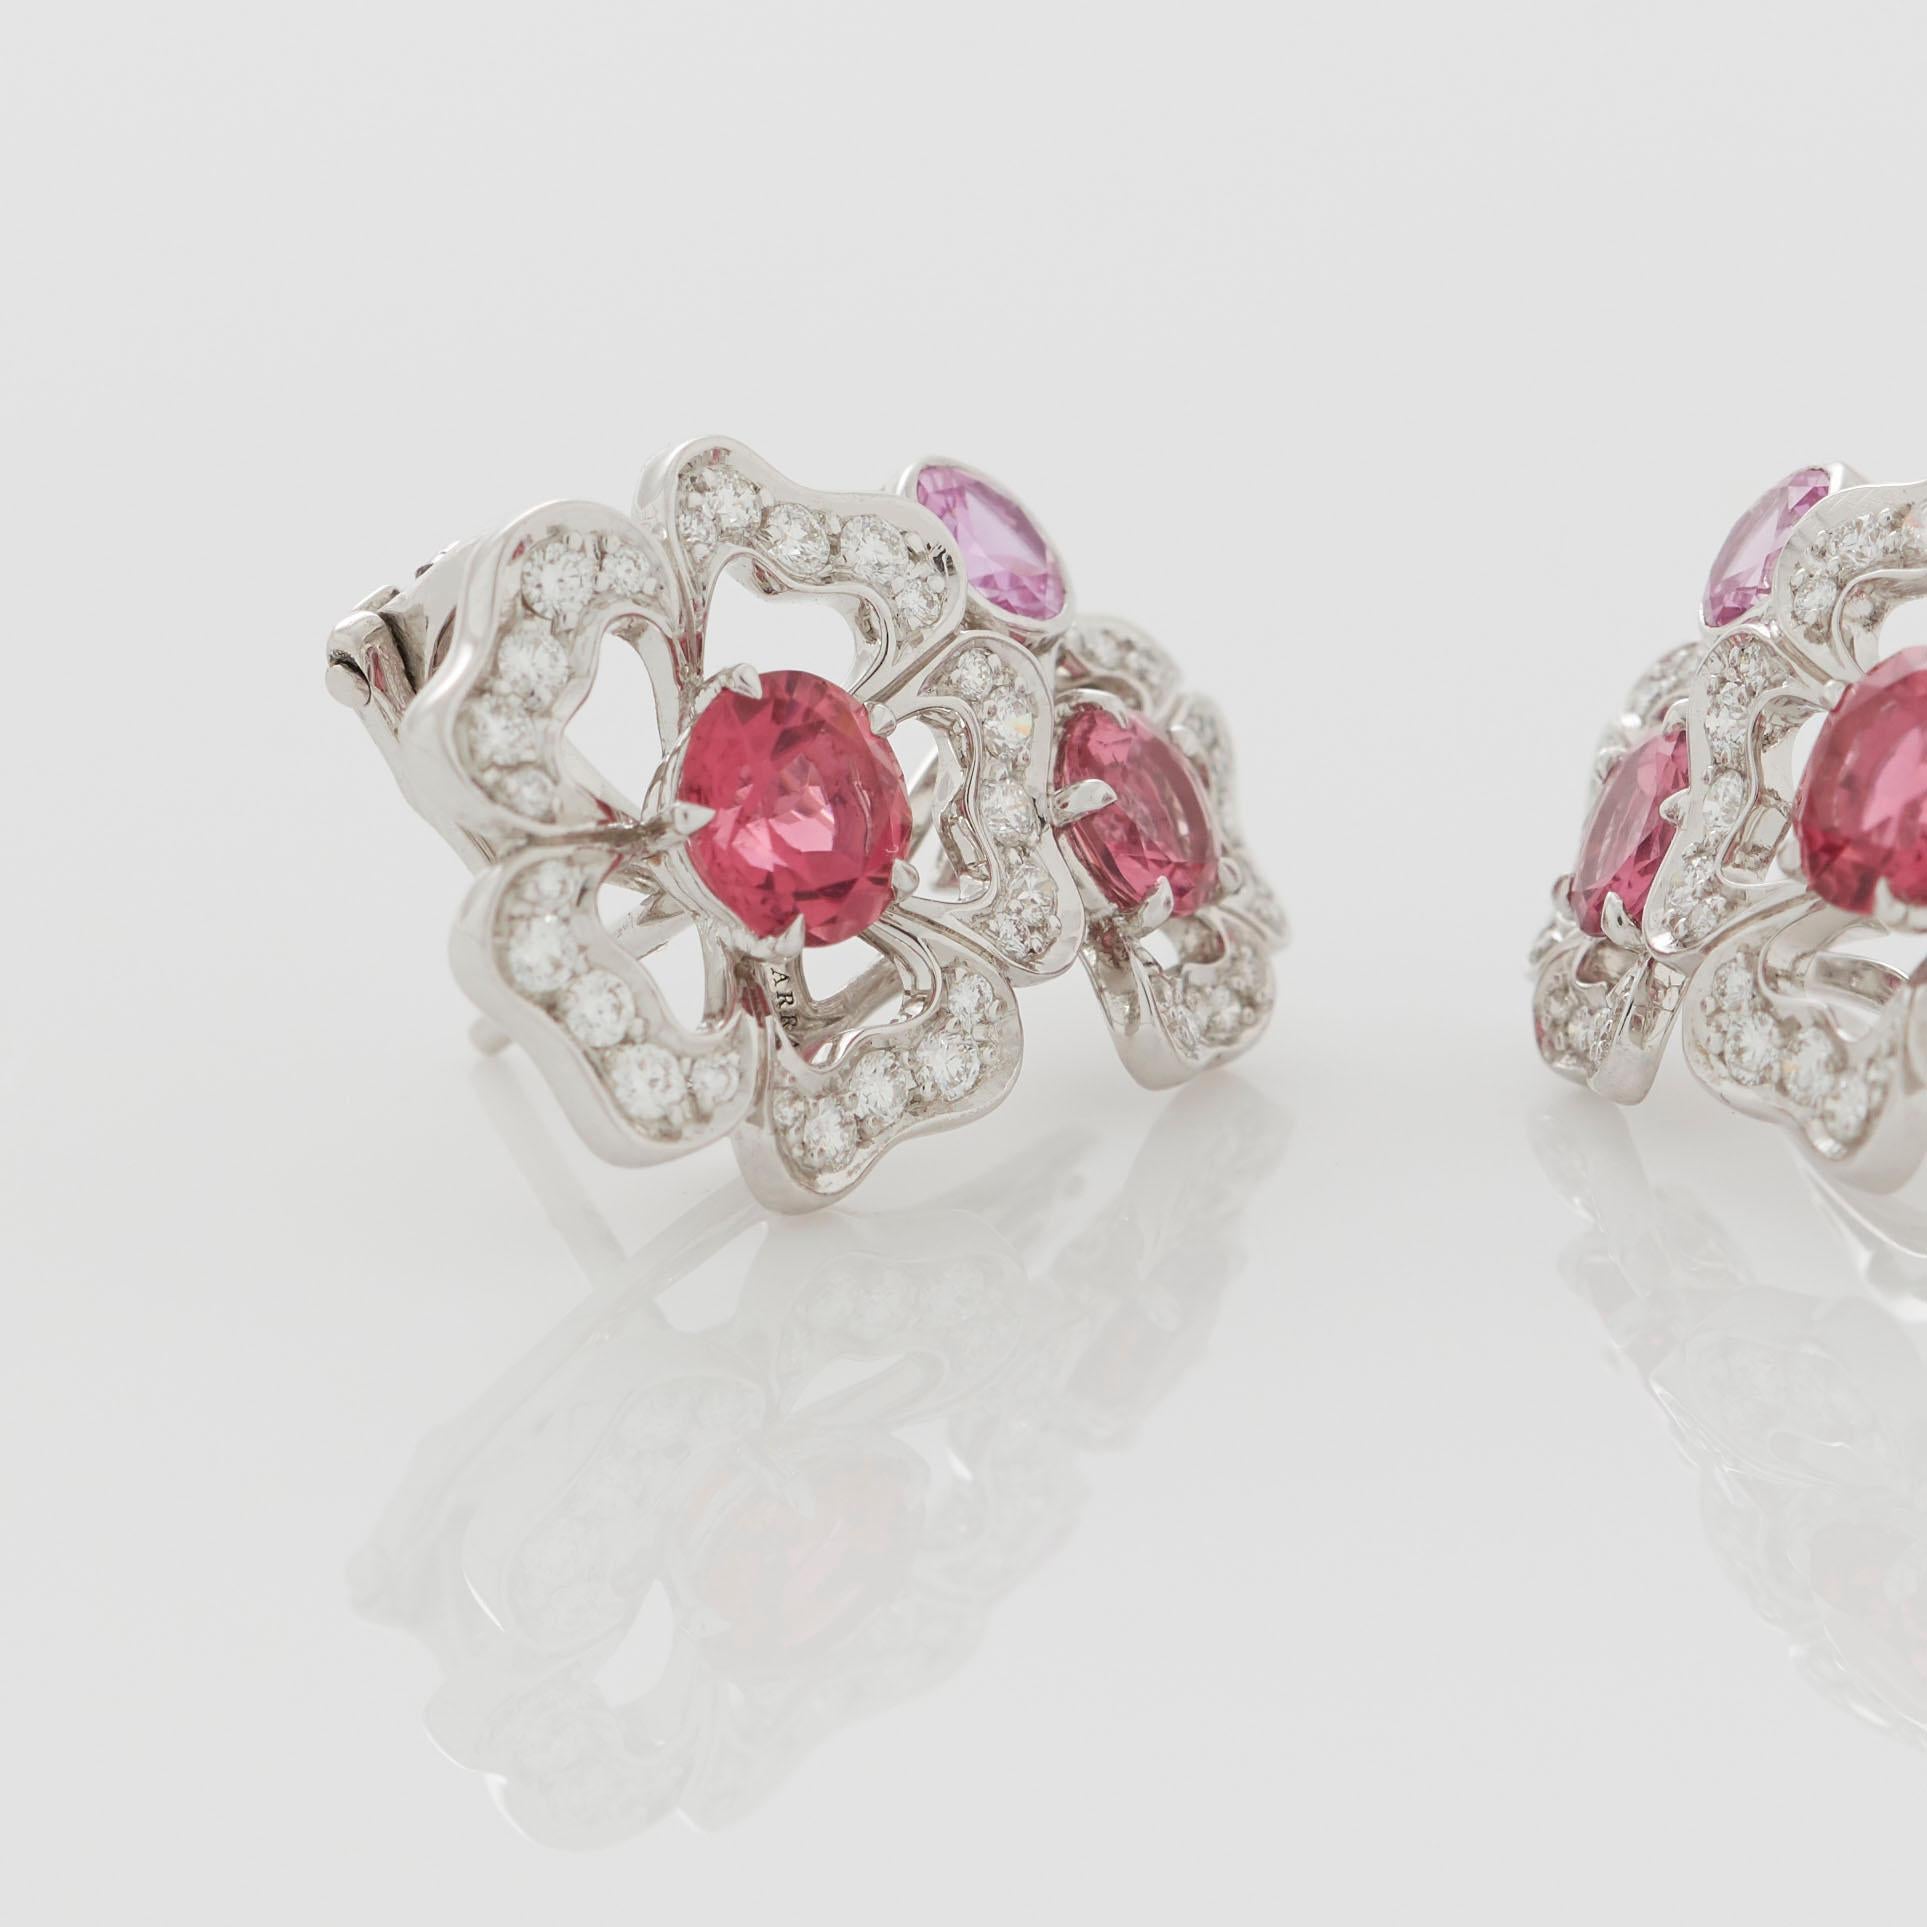 A House of Garrard pair of 18 karat white gold ear climbers from the Tudor Rose Petal collection set with tourmalines, pink sapphires, rubellites and round white diamonds. 

2 round rubellites weighing 1.22cts
2 round pink tourmalines weighing